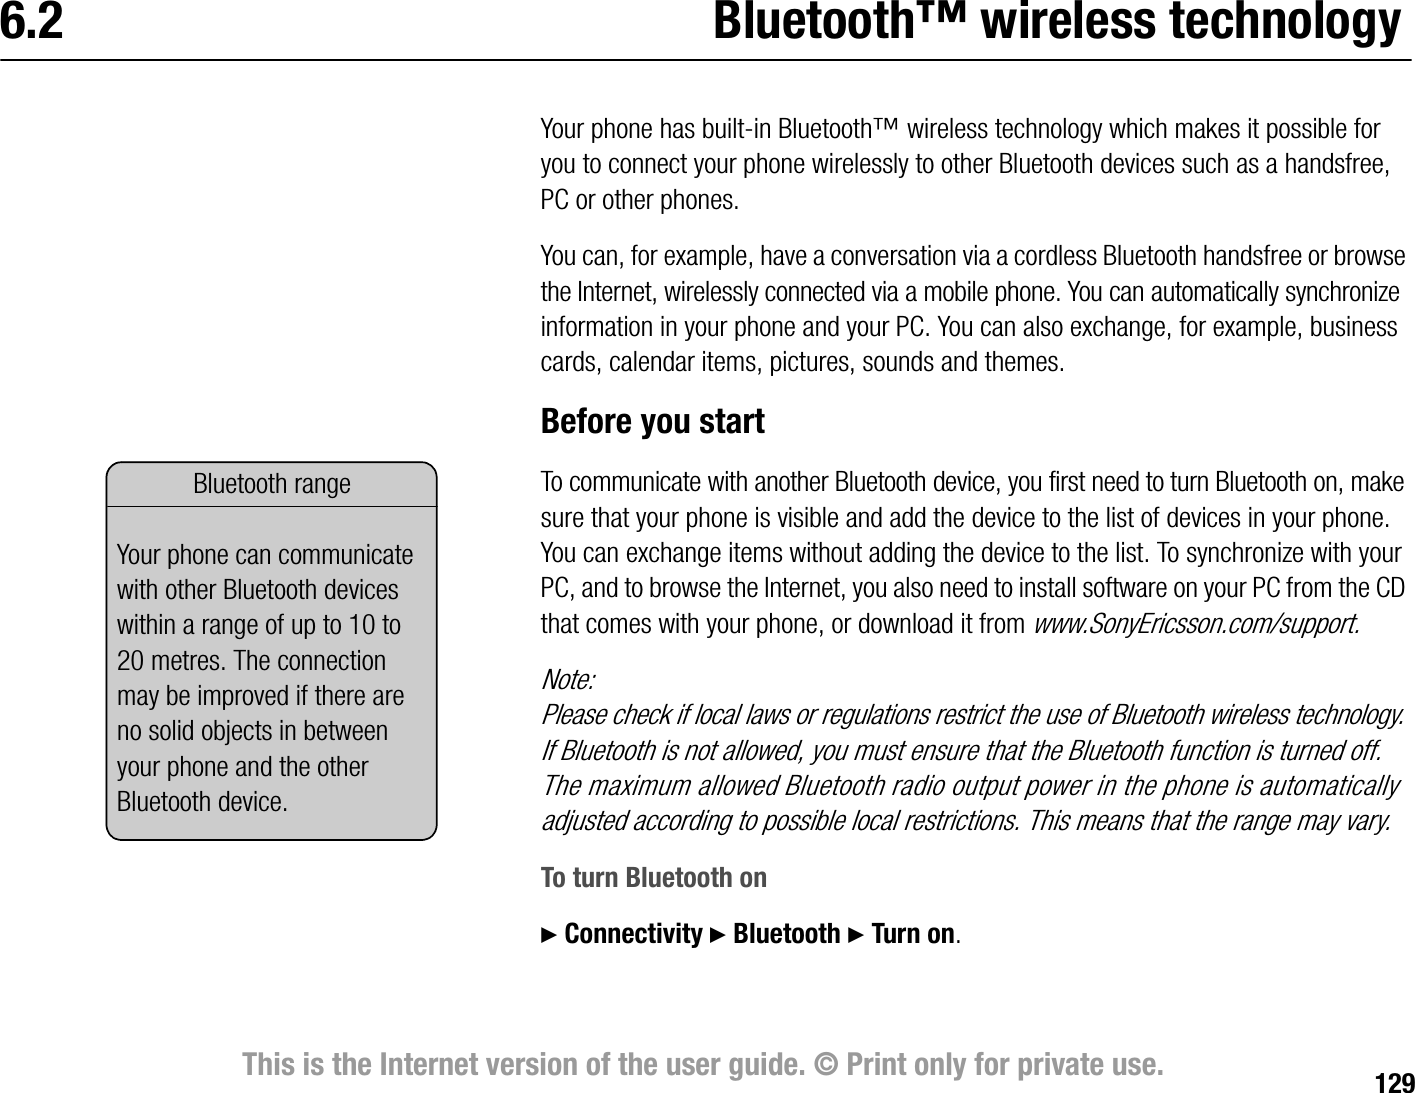 129This is the Internet version of the user guide. © Print only for private use.6.2 Bluetooth™ wireless technologyYour phone has builtin Bluetooth™ wireless technology which makes it possible for you to connect your phone wirelessly to other Bluetooth devices such as a handsfree, PC or other phones.You can, for example, have a conversation via a cordless Bluetooth handsfree or browse the Internet, wirelessly connected via a mobile phone. You can automatically synchronize information in your phone and your PC. You can also exchange, for example, business cards, calendar items, pictures, sounds and themes.Before you startTo communicate with another Bluetooth device, you first need to turn Bluetooth on, make sure that your phone is visible and add the device to the list of devices in your phone. You can exchange items without adding the device to the list. To synchronize with your PC, and to browse the Internet, you also need to install software on your PC from the CD that comes with your phone, or download it from www.SonyEricsson.com/support.Note:Please check if local laws or regulations restrict the use of Bluetooth wireless technology. If Bluetooth is not allowed, you must ensure that the Bluetooth function is turned off. The maximum allowed Bluetooth radio output power in the phone is automatically adjusted according to possible local restrictions. This means that the range may vary.To turn Bluetooth on} Connectivity } Bluetooth } Turn on.Bluetooth rangeYour phone can communicate with other Bluetooth devices within a range of up to 10 to 20 metres. The connection may be improved if there are no solid objects in between your phone and the other Bluetooth device.